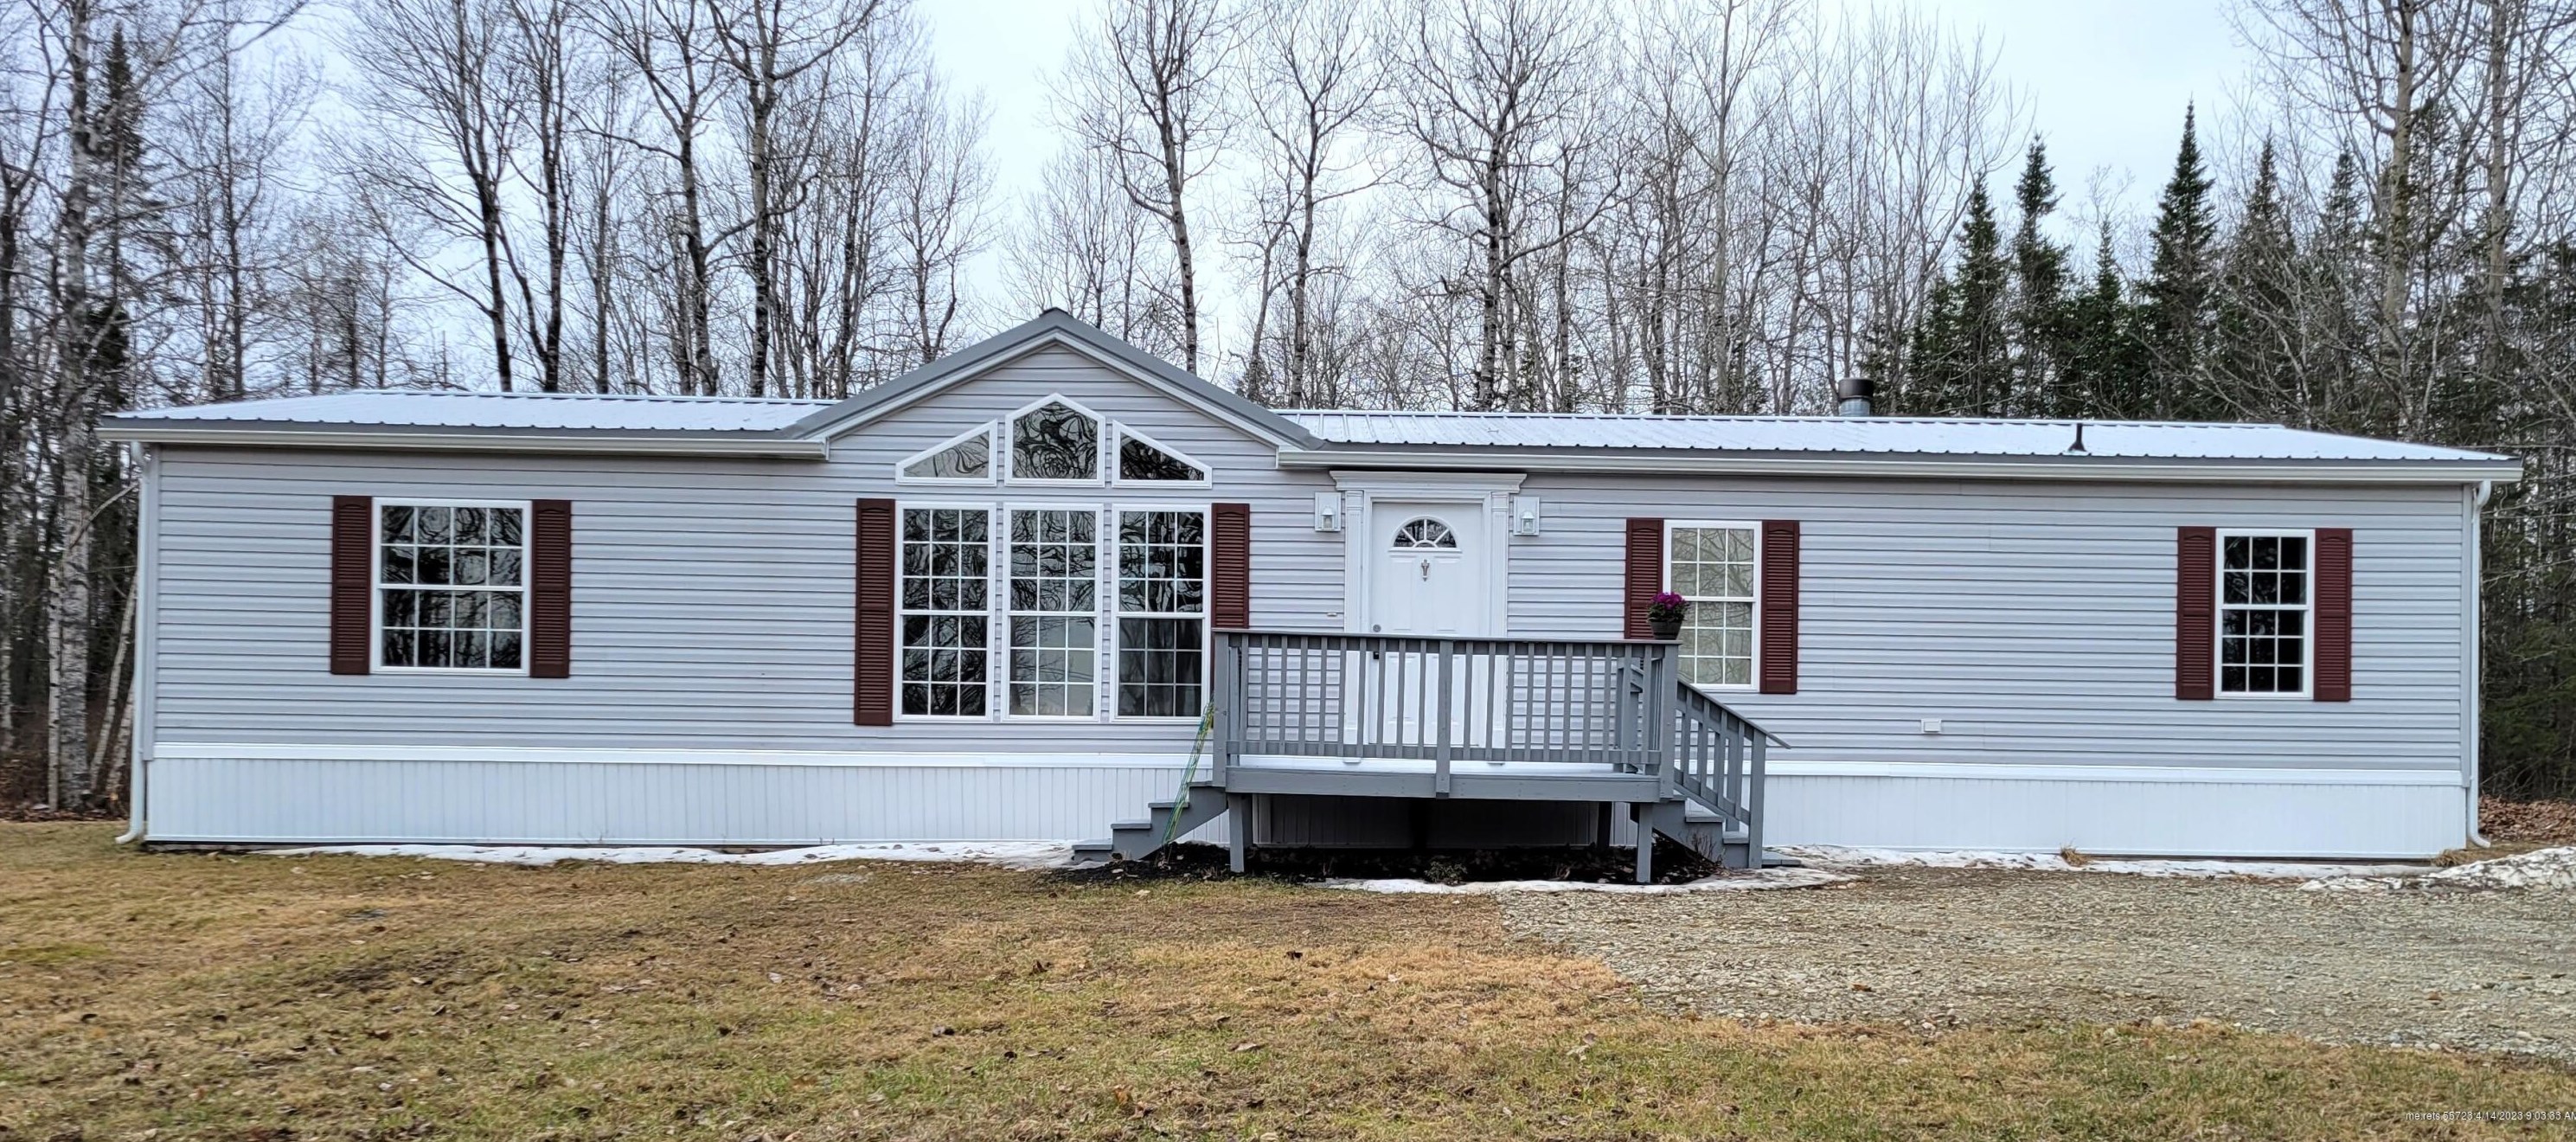 169 Clewleyville Rd, Clifton, ME 04428